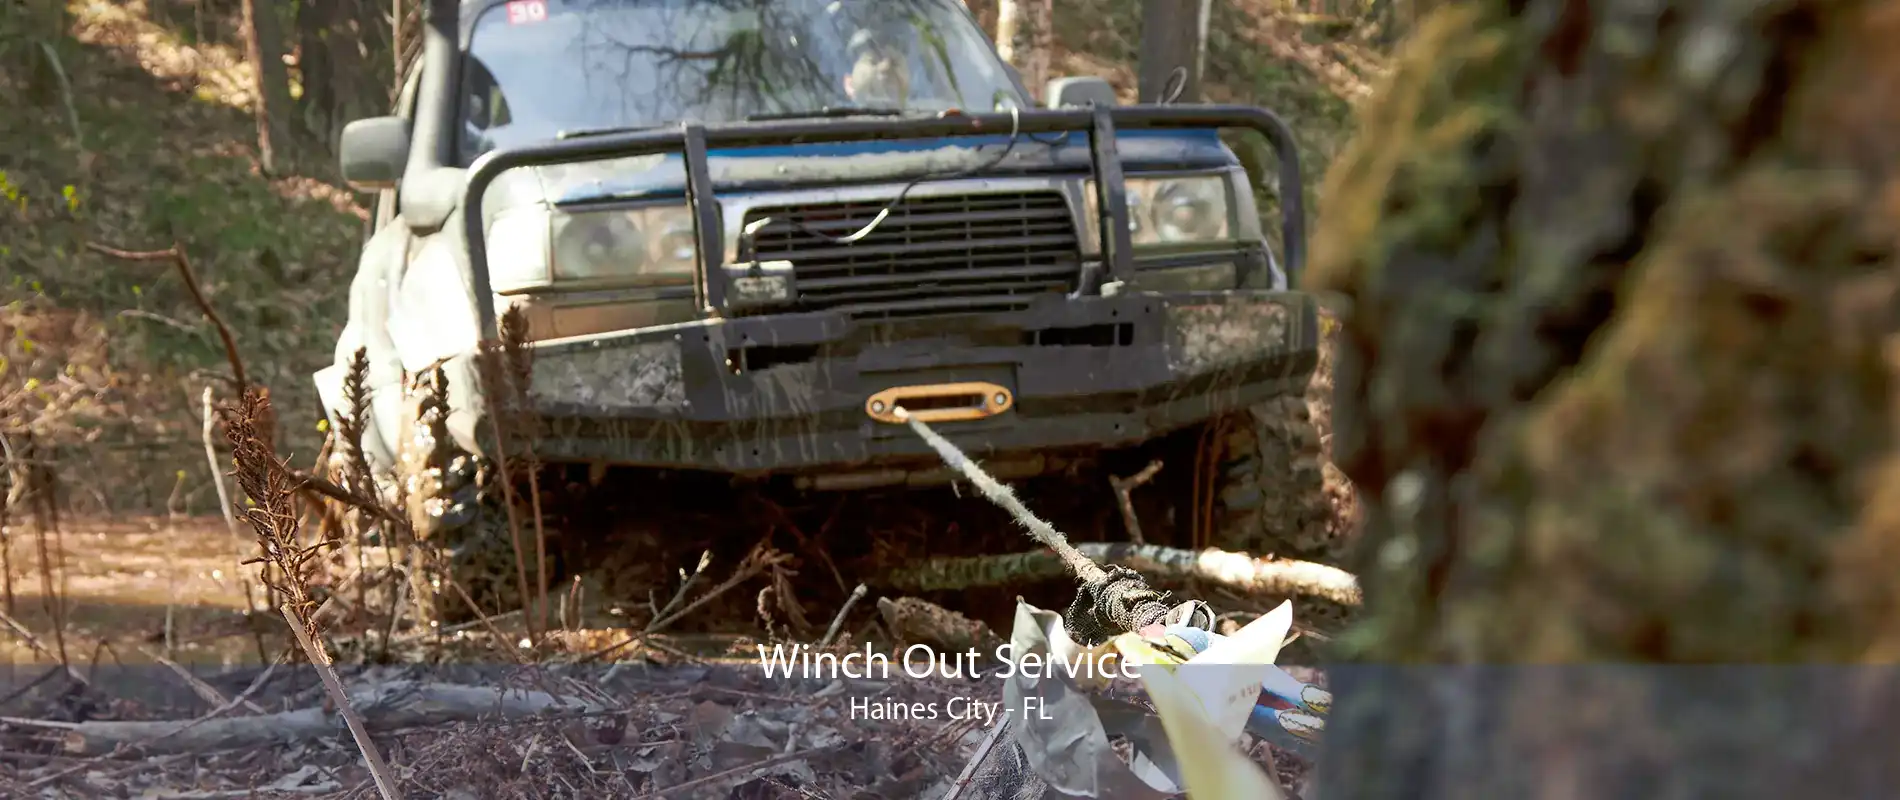 Winch Out Service Haines City - FL